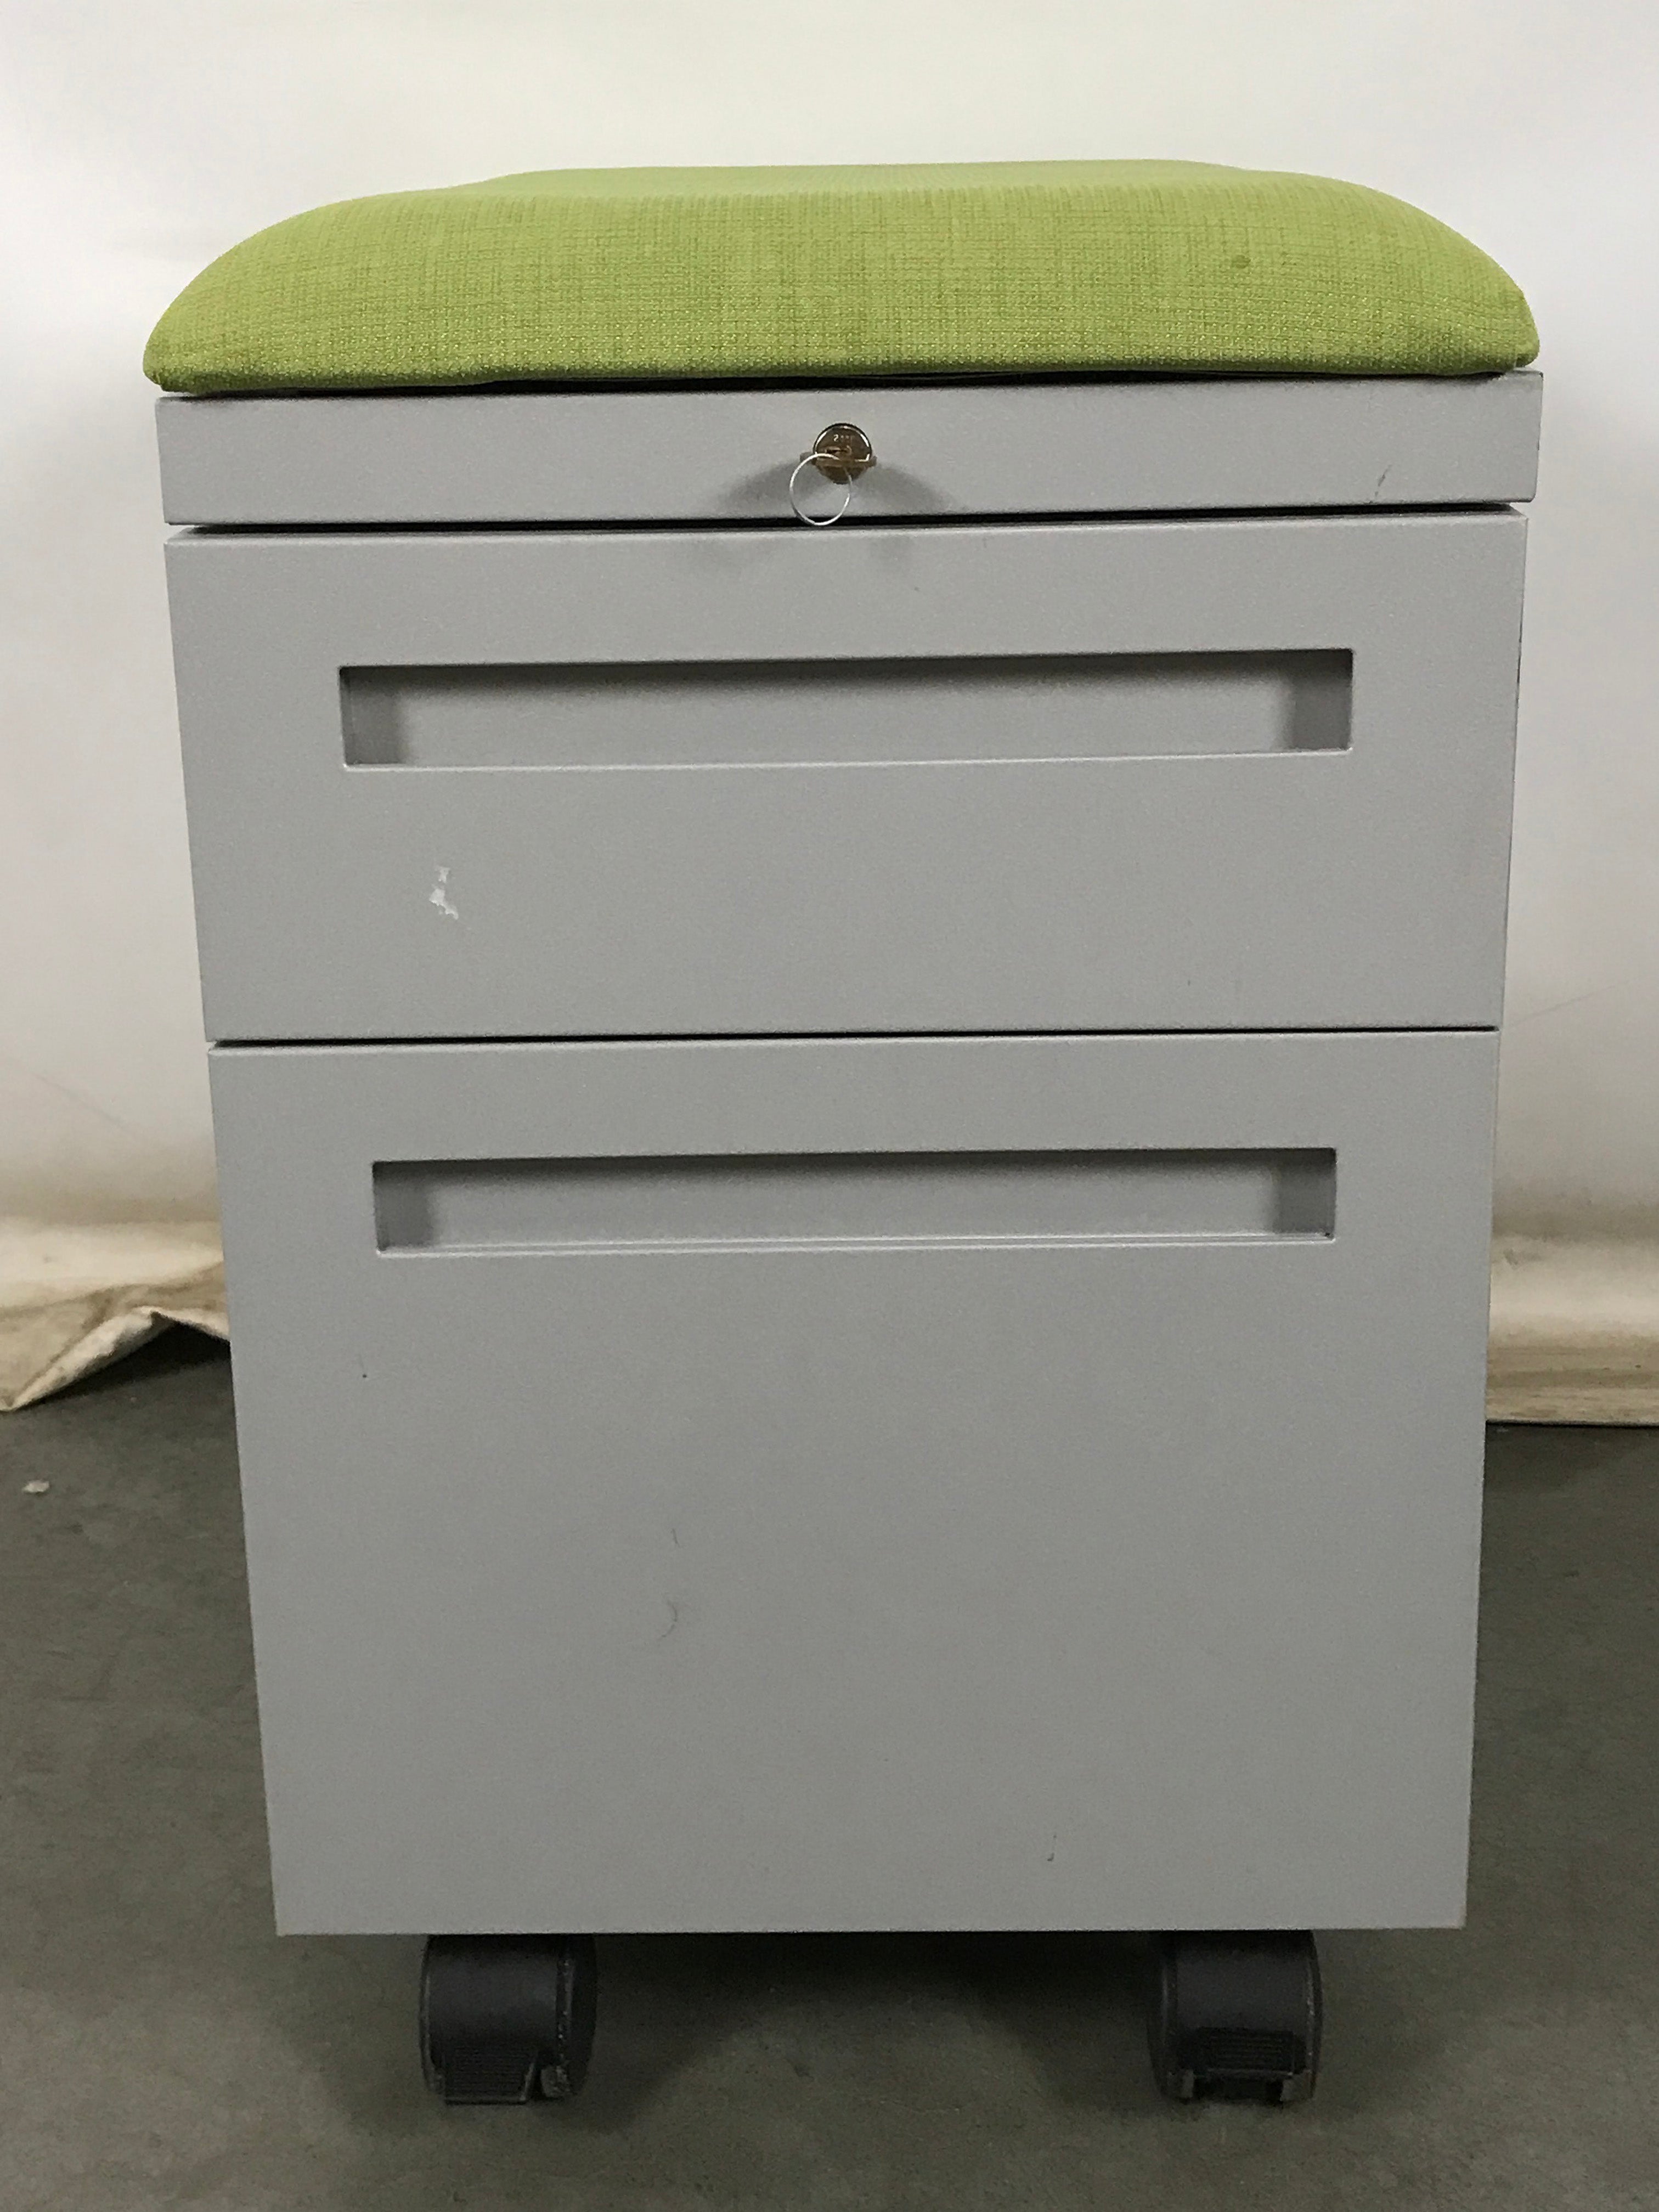 Allsteel 2 Drawer Rolling Lateral File Cabinet